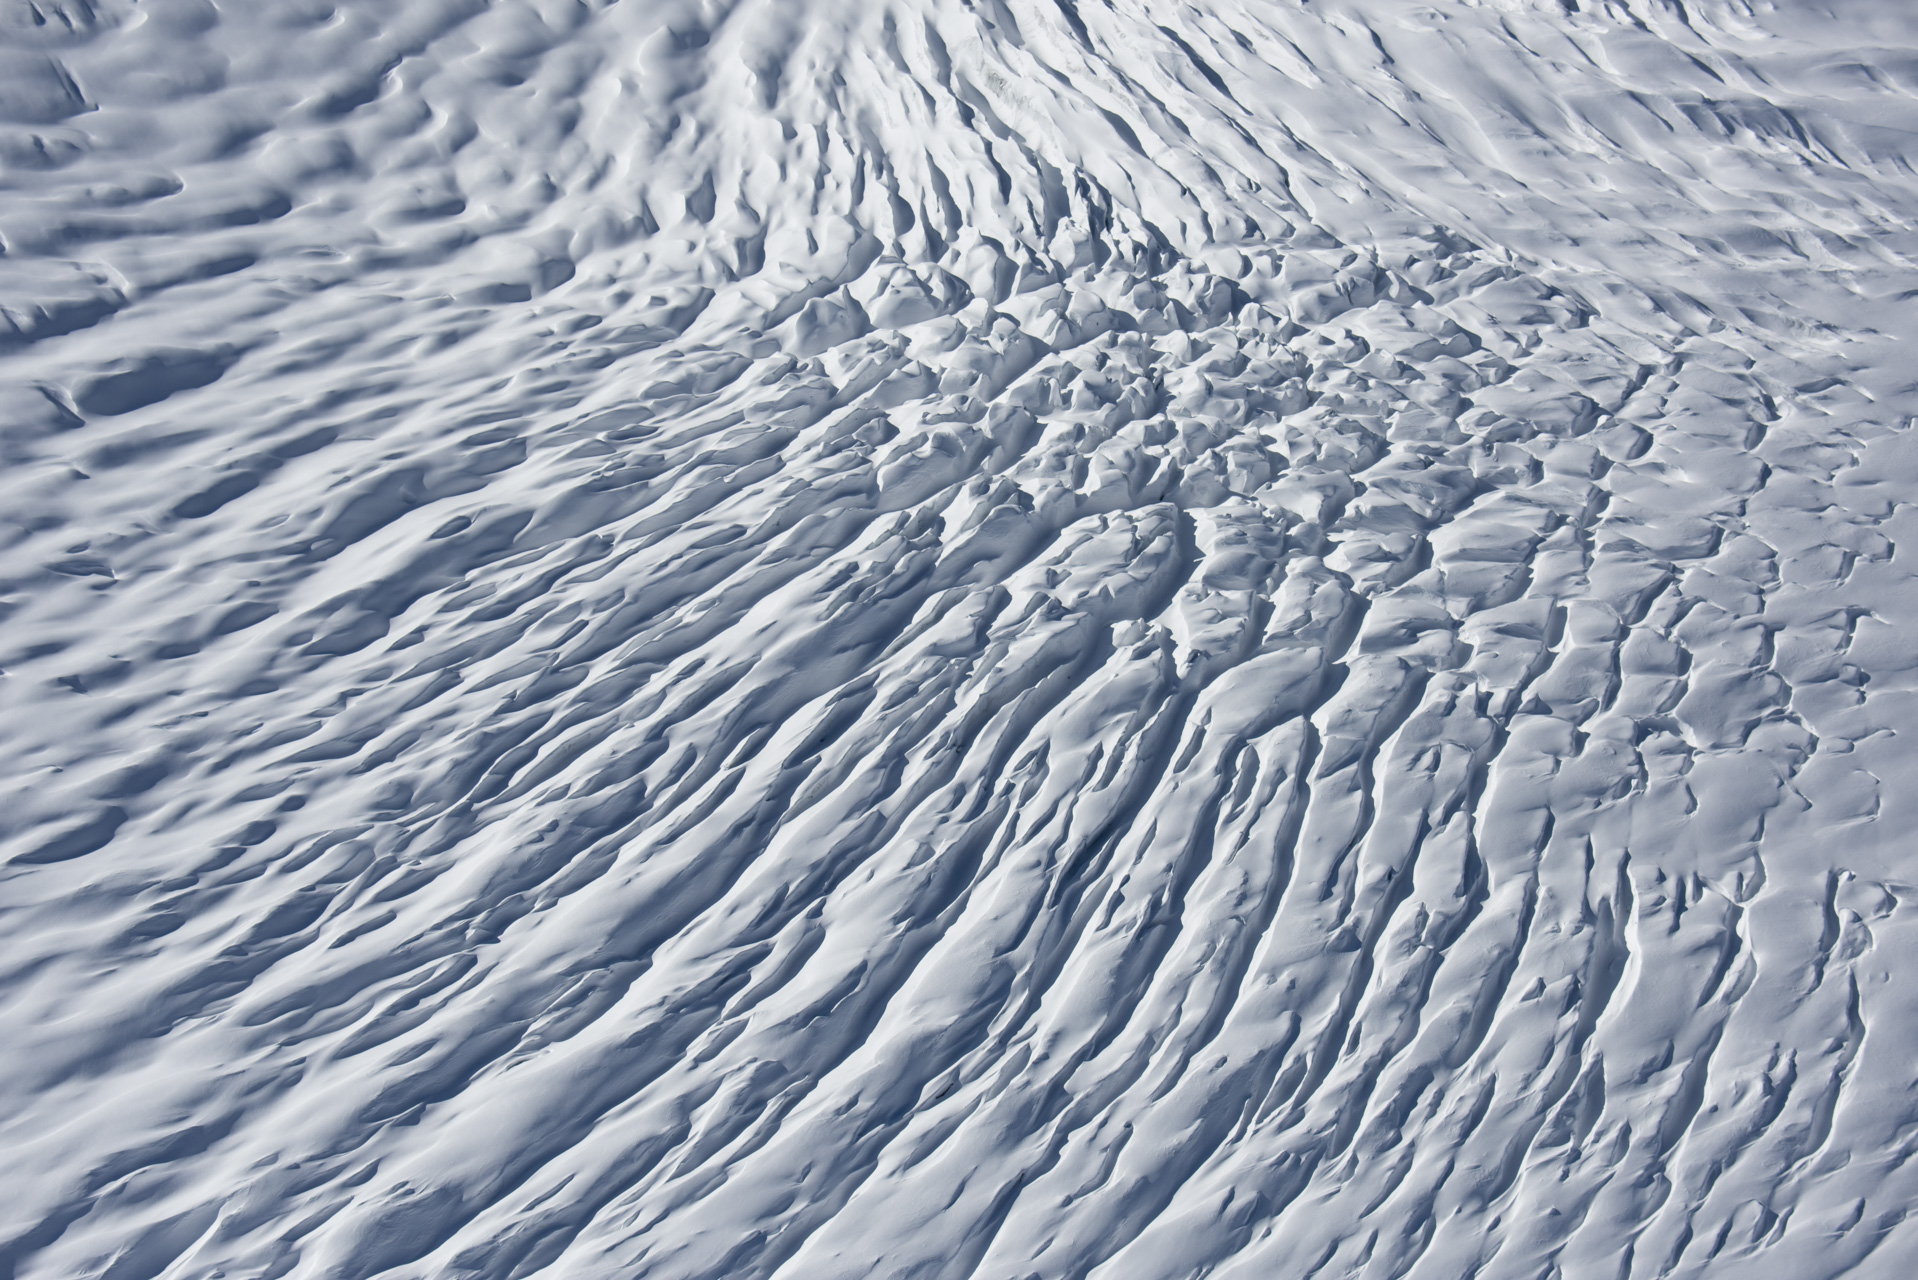 Aletsch glacie - Abstract photo of Swiss Aletsch Glacier crevasses in the Bernese Alps